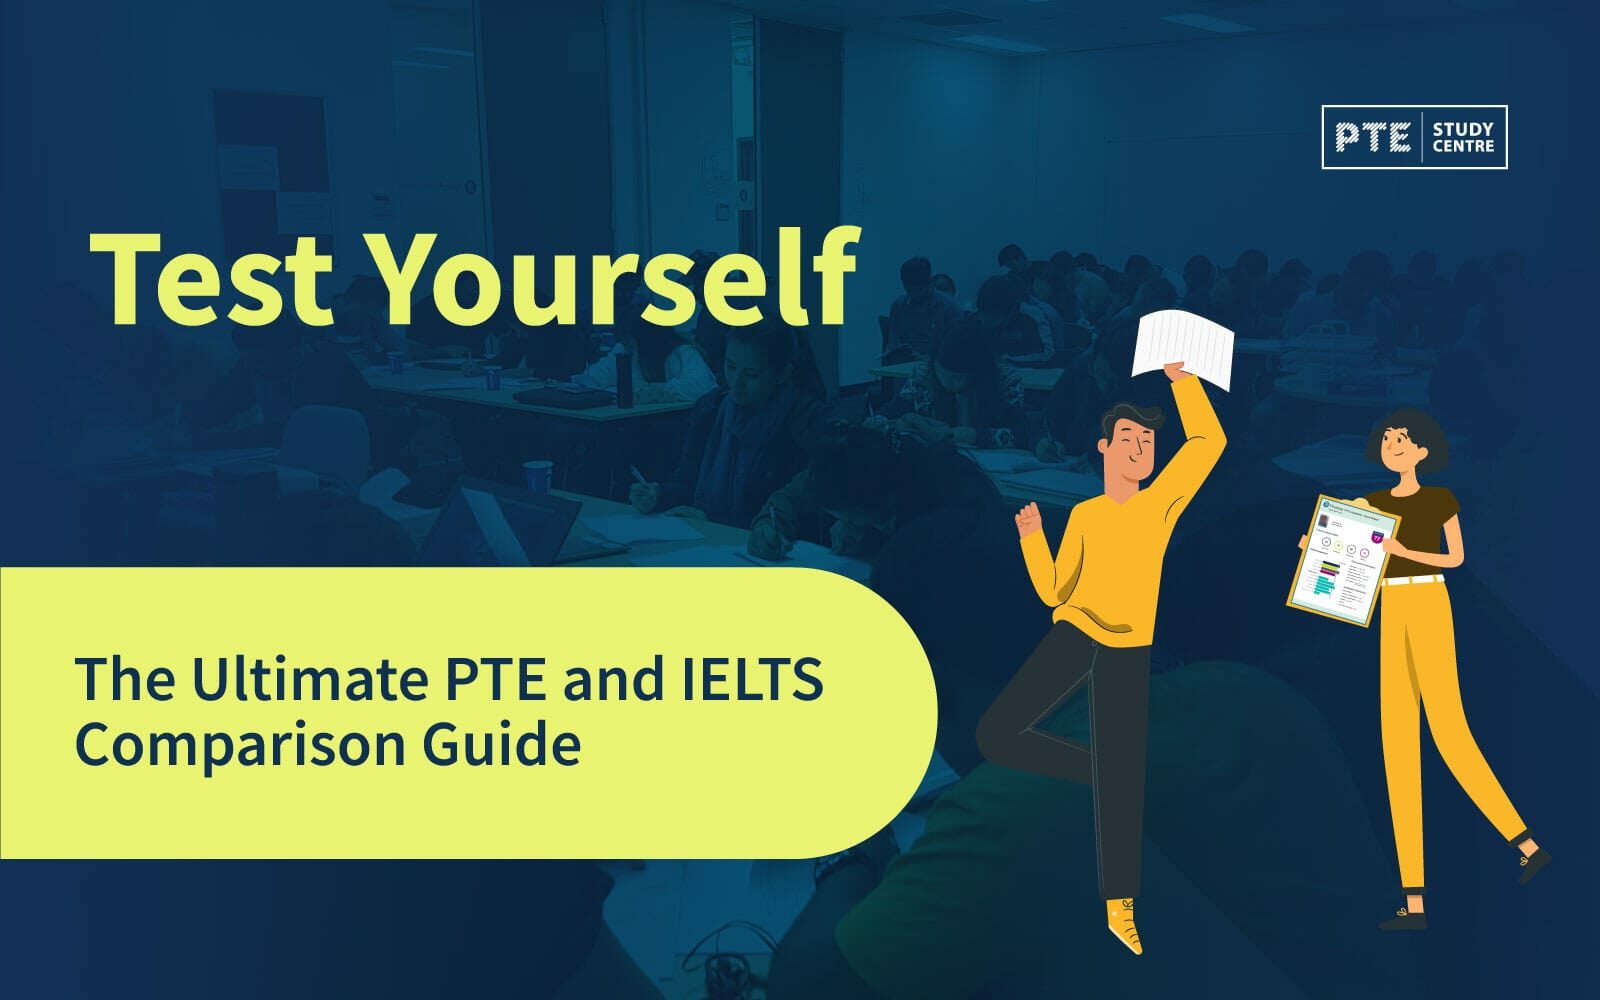 Test Yourself: The Ultimate PTE and IELTS Comparison Guide